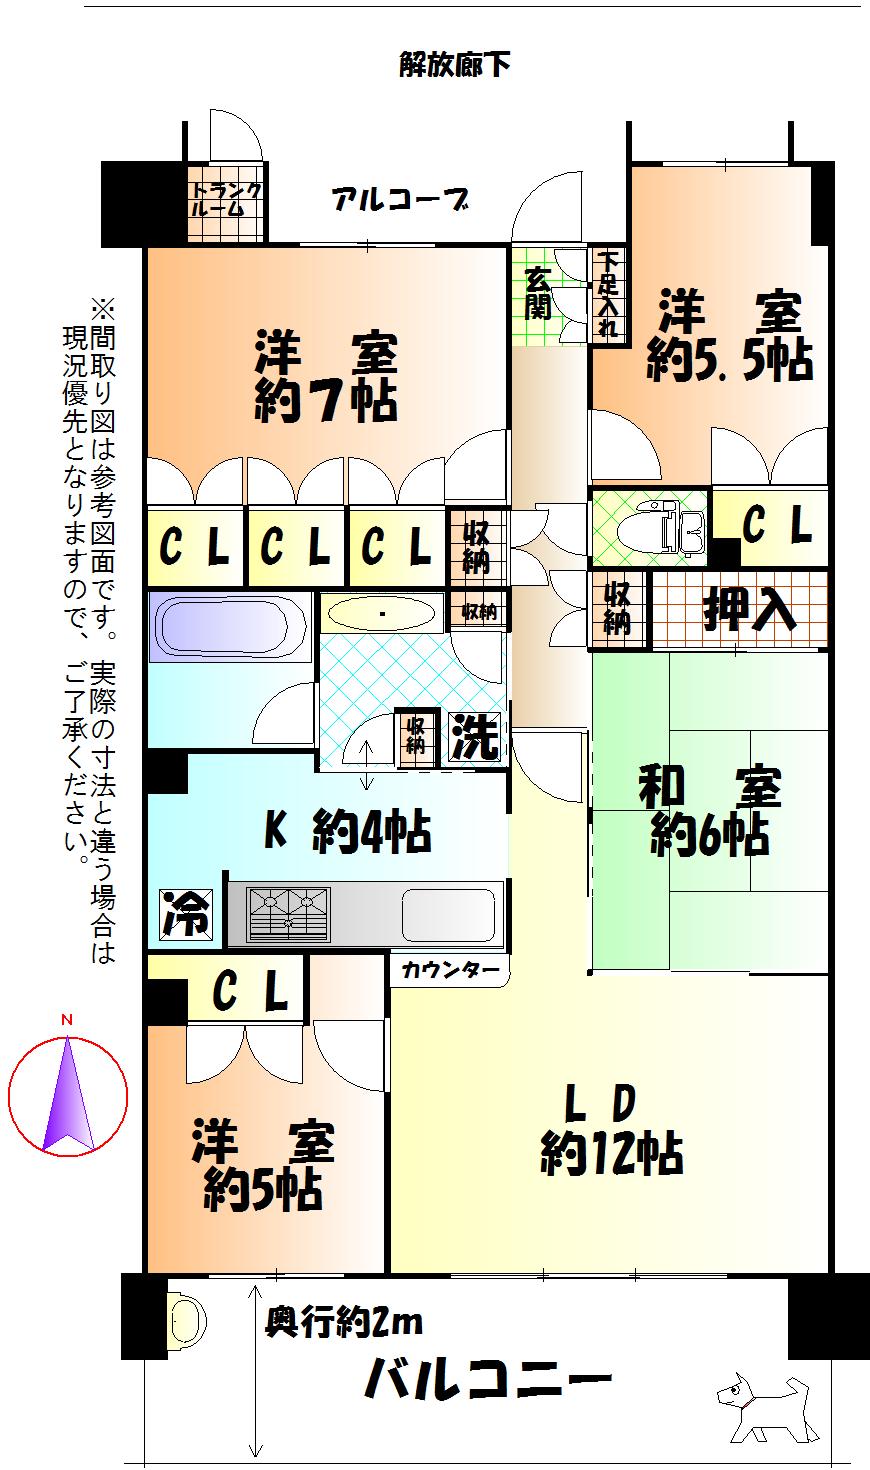 Floor plan. 4LDK, Price 29,800,000 yen, Occupied area 86.63 sq m , It is 4LDK of balcony area 14.4 sq m room. Since the water around is located in the center, The sound is also bedroom not relax has become pleasure not be heard in the LDK.